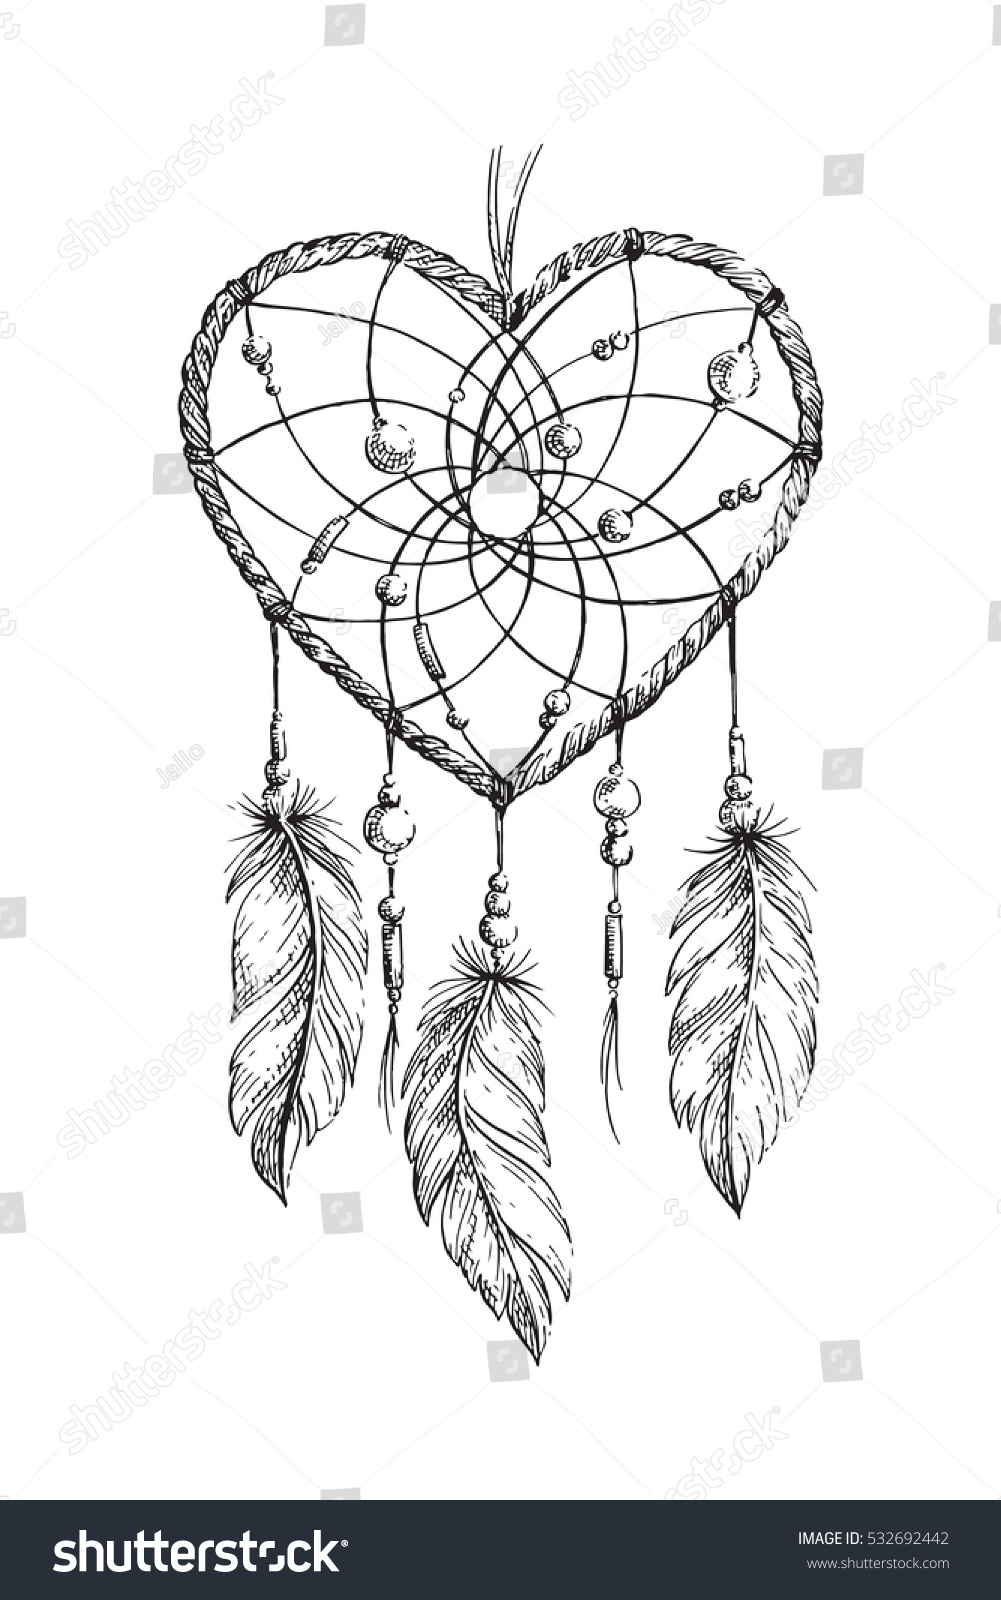 Hand drawn ethnic dreamcatcher heart Coloring page for adults Vector illustration Boho isolated